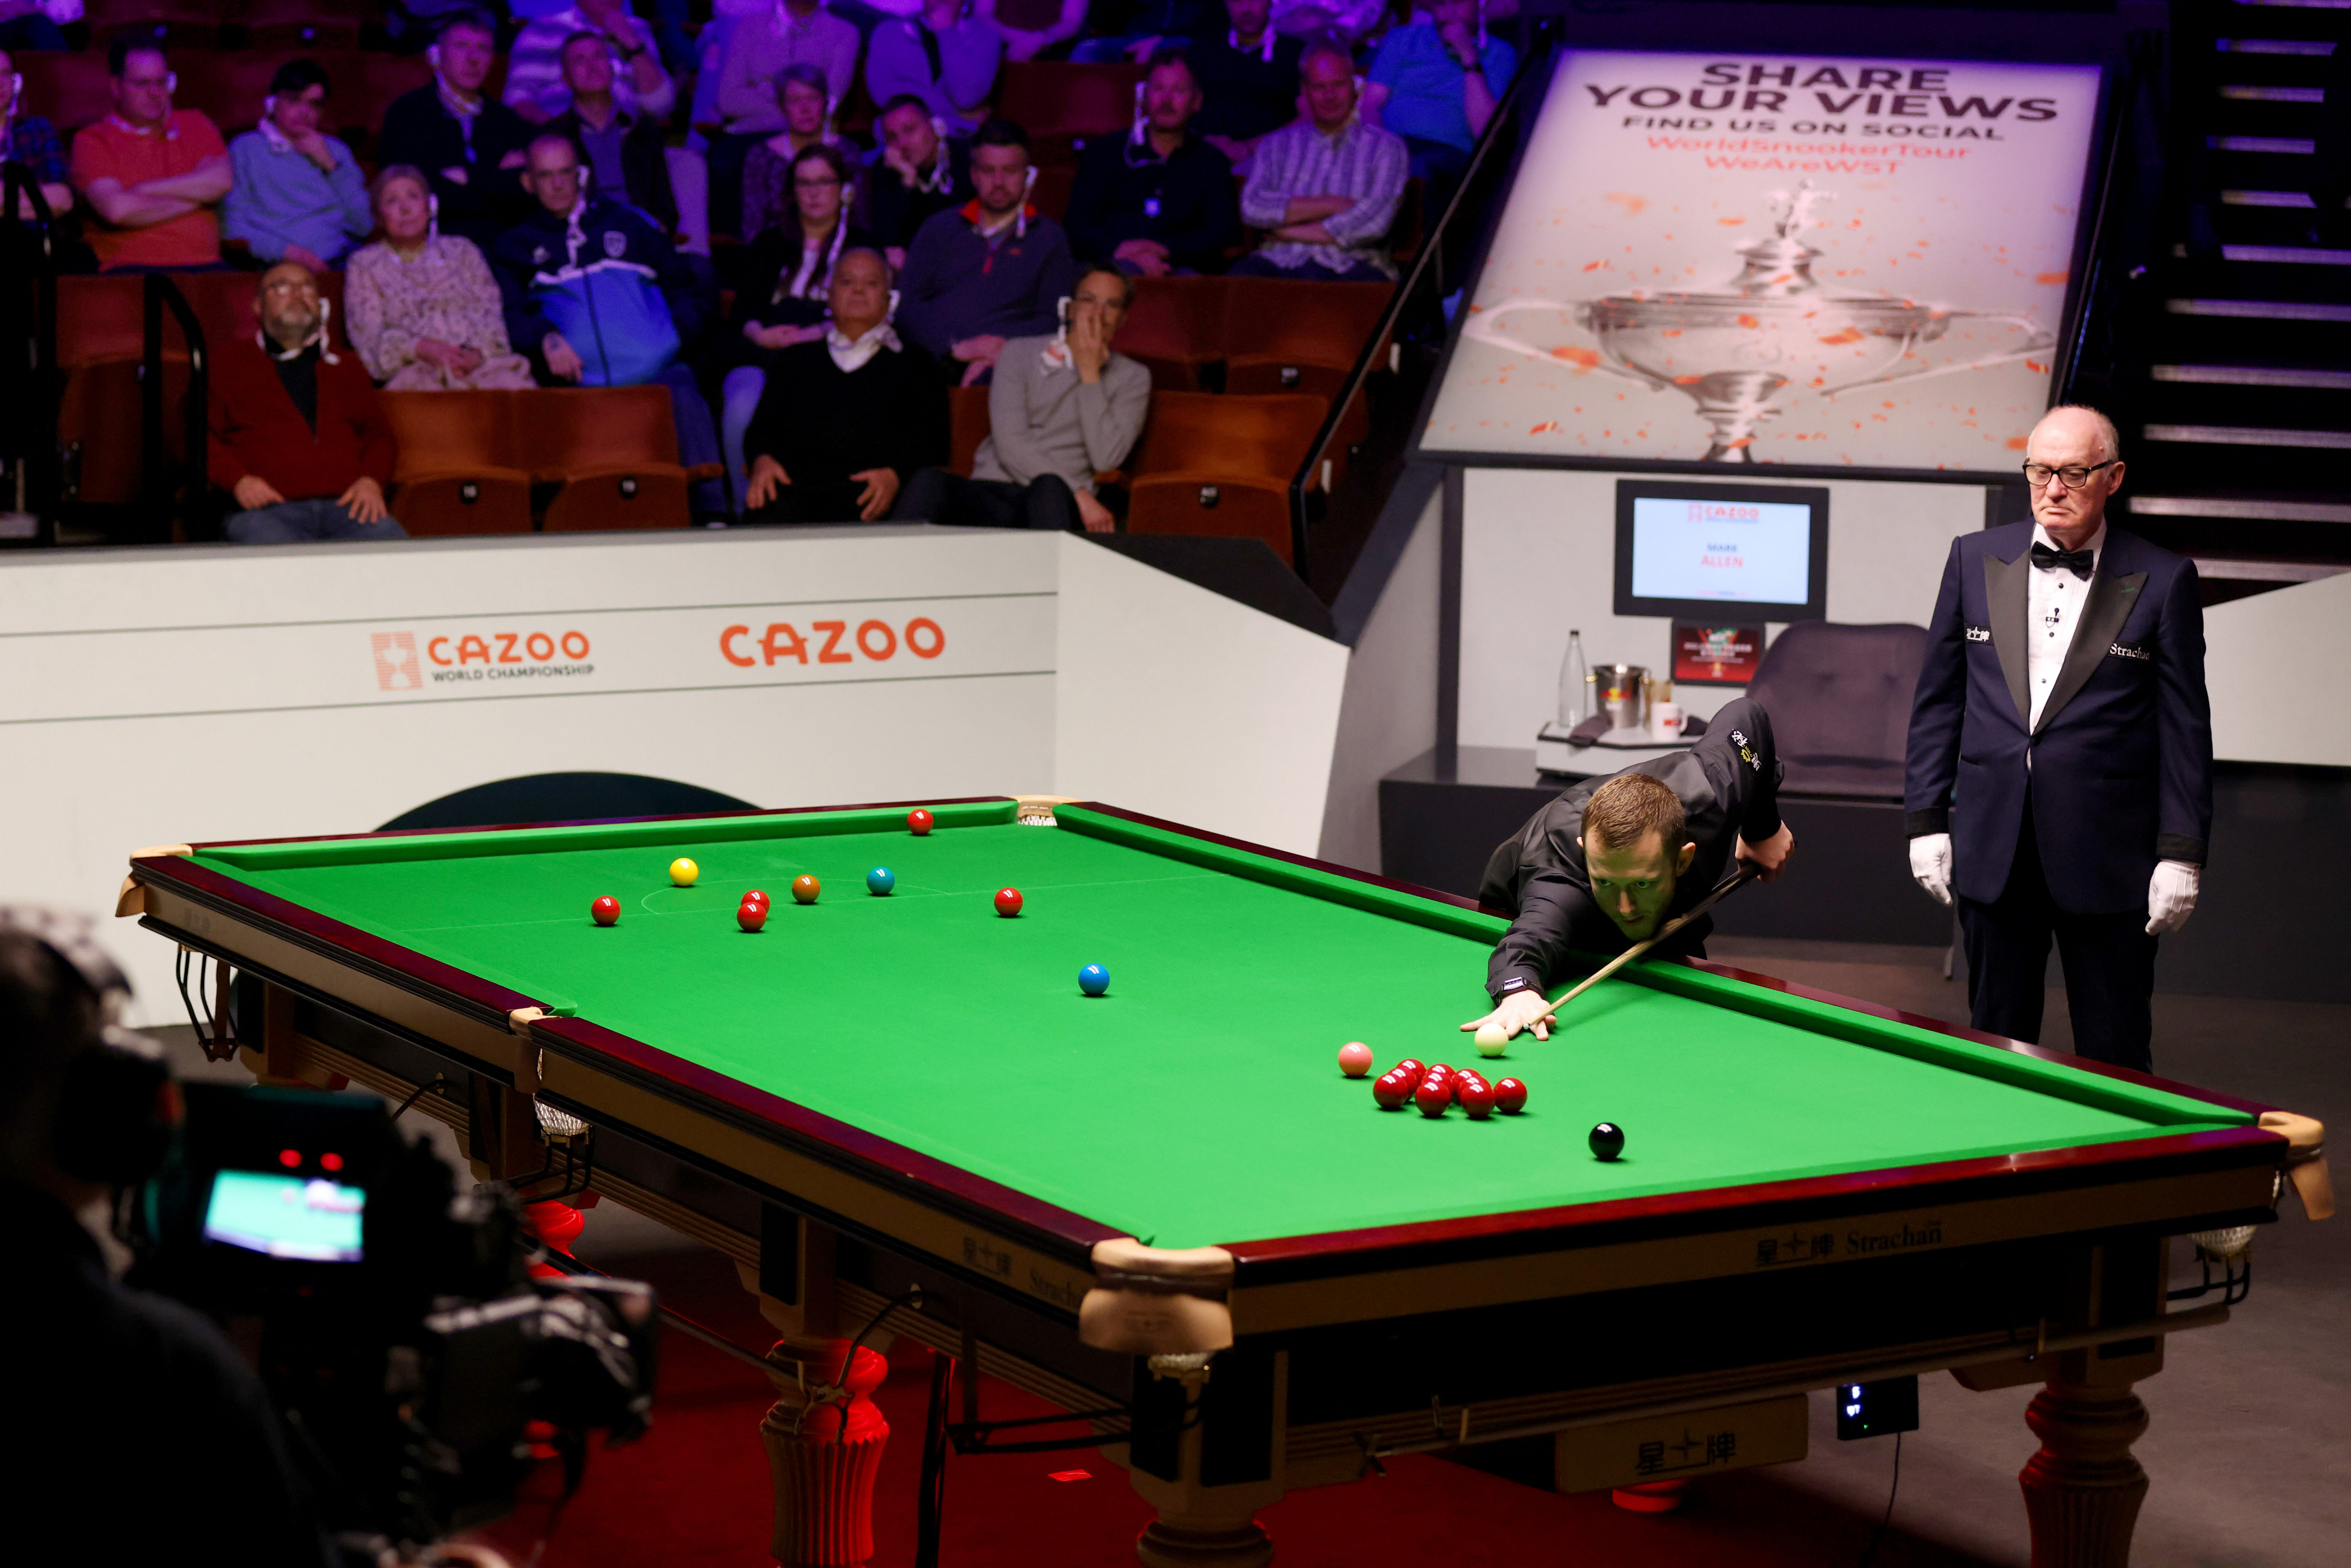 Mark Allen goes for a pot in the championship last year during a match against Mark Selby